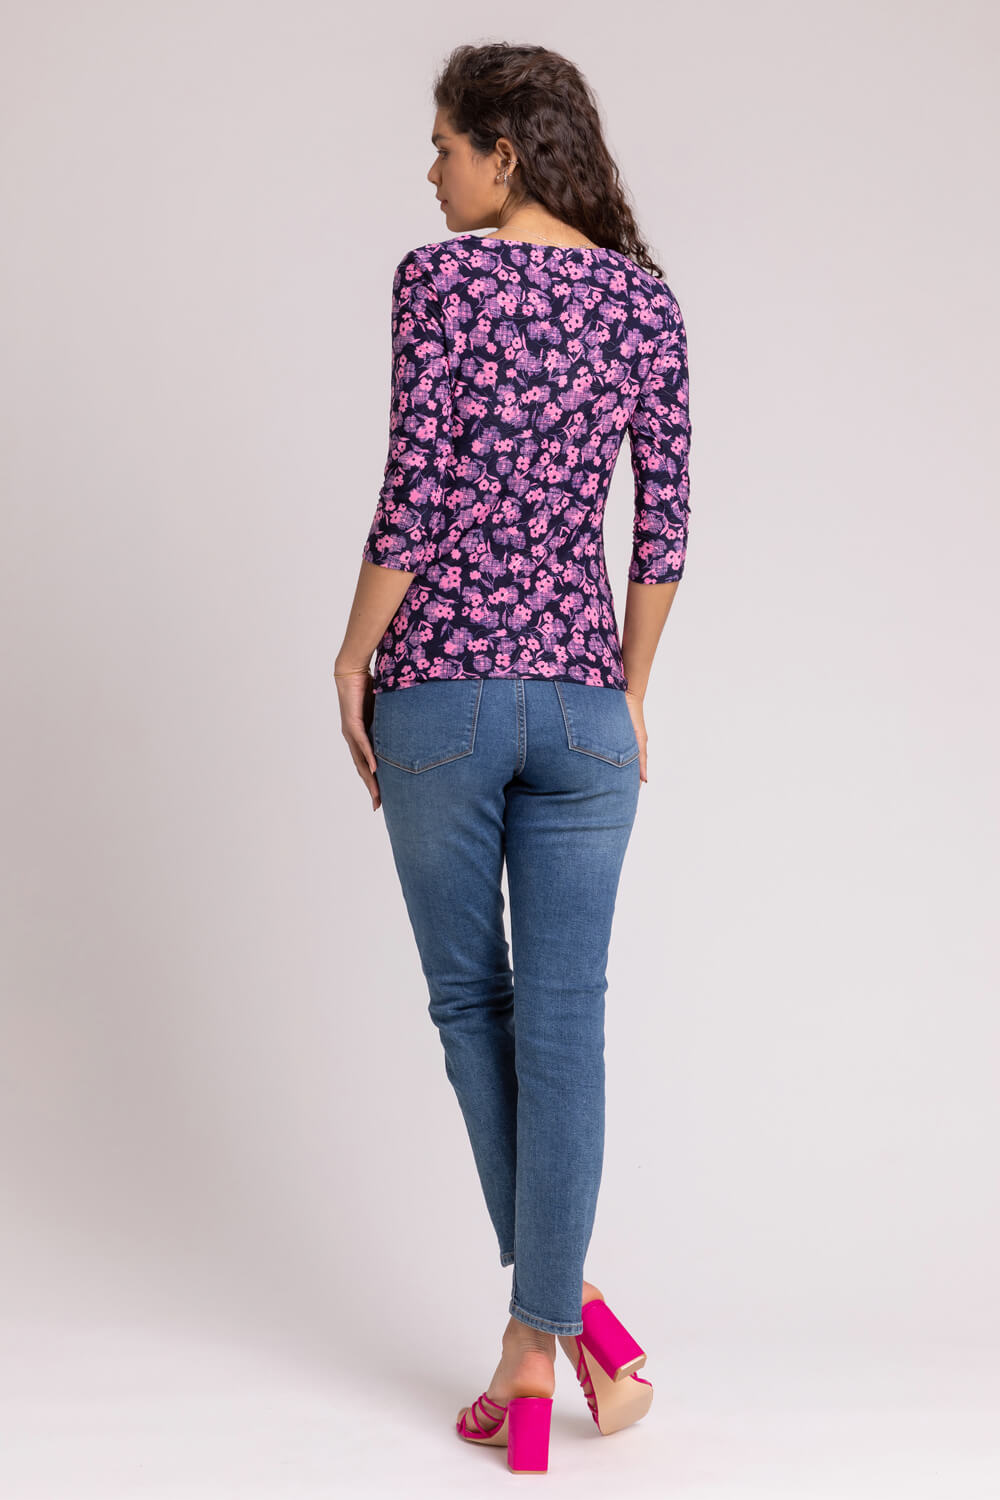 PINK Floral Print Cowl Neck Top, Image 2 of 4